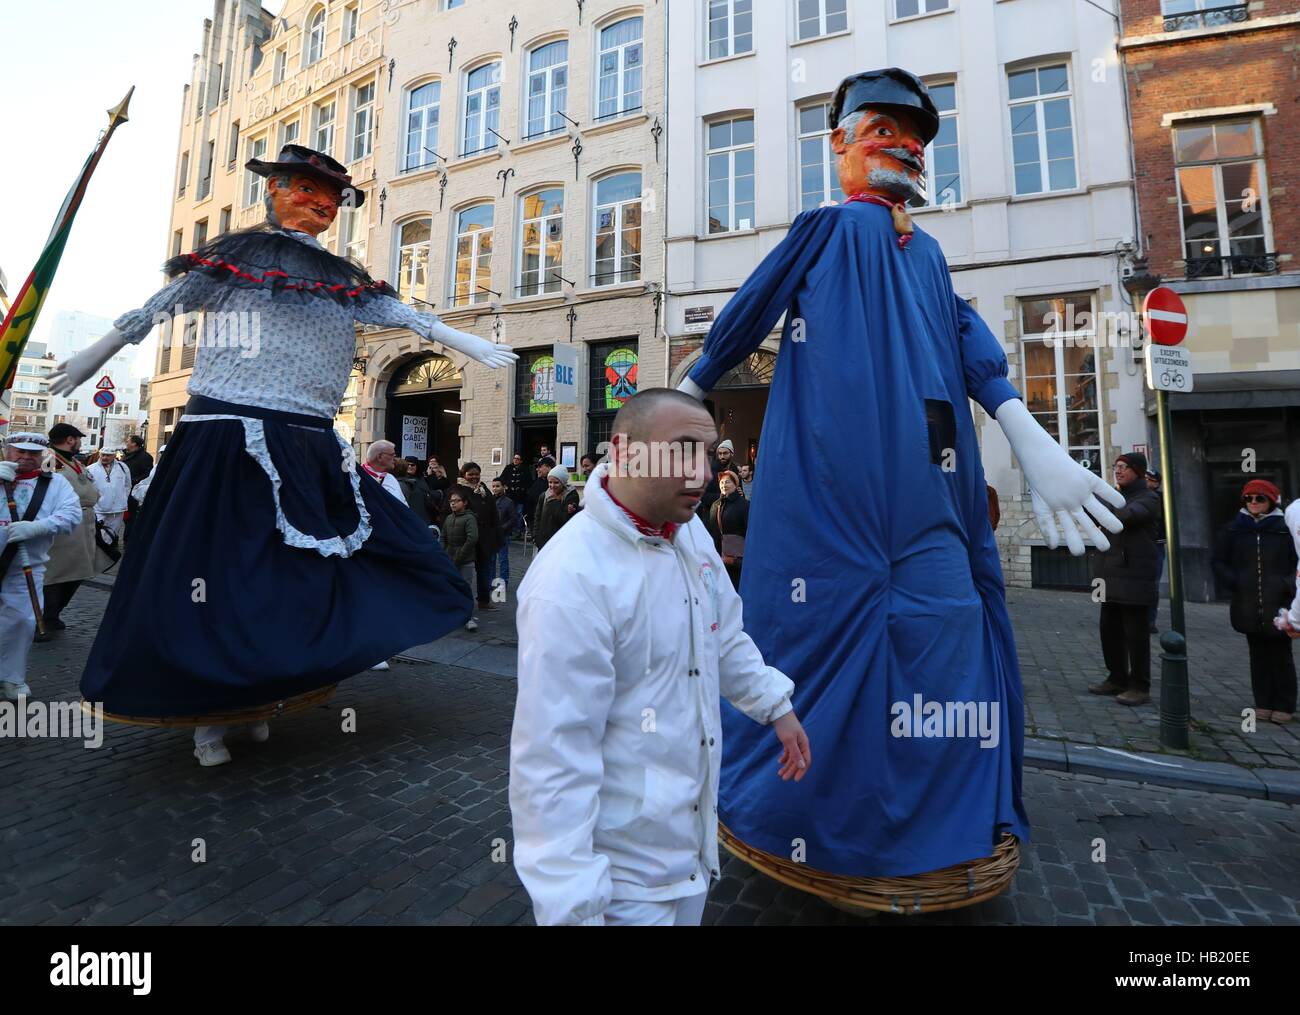 Brussels, Belgium. 3rd Dec, 2016. People participate in the Saint-Nicolas Parade in Brussels, Belgium, Dec. 3, 2016. Saint-Nicolas, who is one of the sources of the popular Christmas icon of Santa Claus, is celebrated annually on the Saint Nicholas Day. Credit:  Gong Bing/Xinhua/Alamy Live News Stock Photo